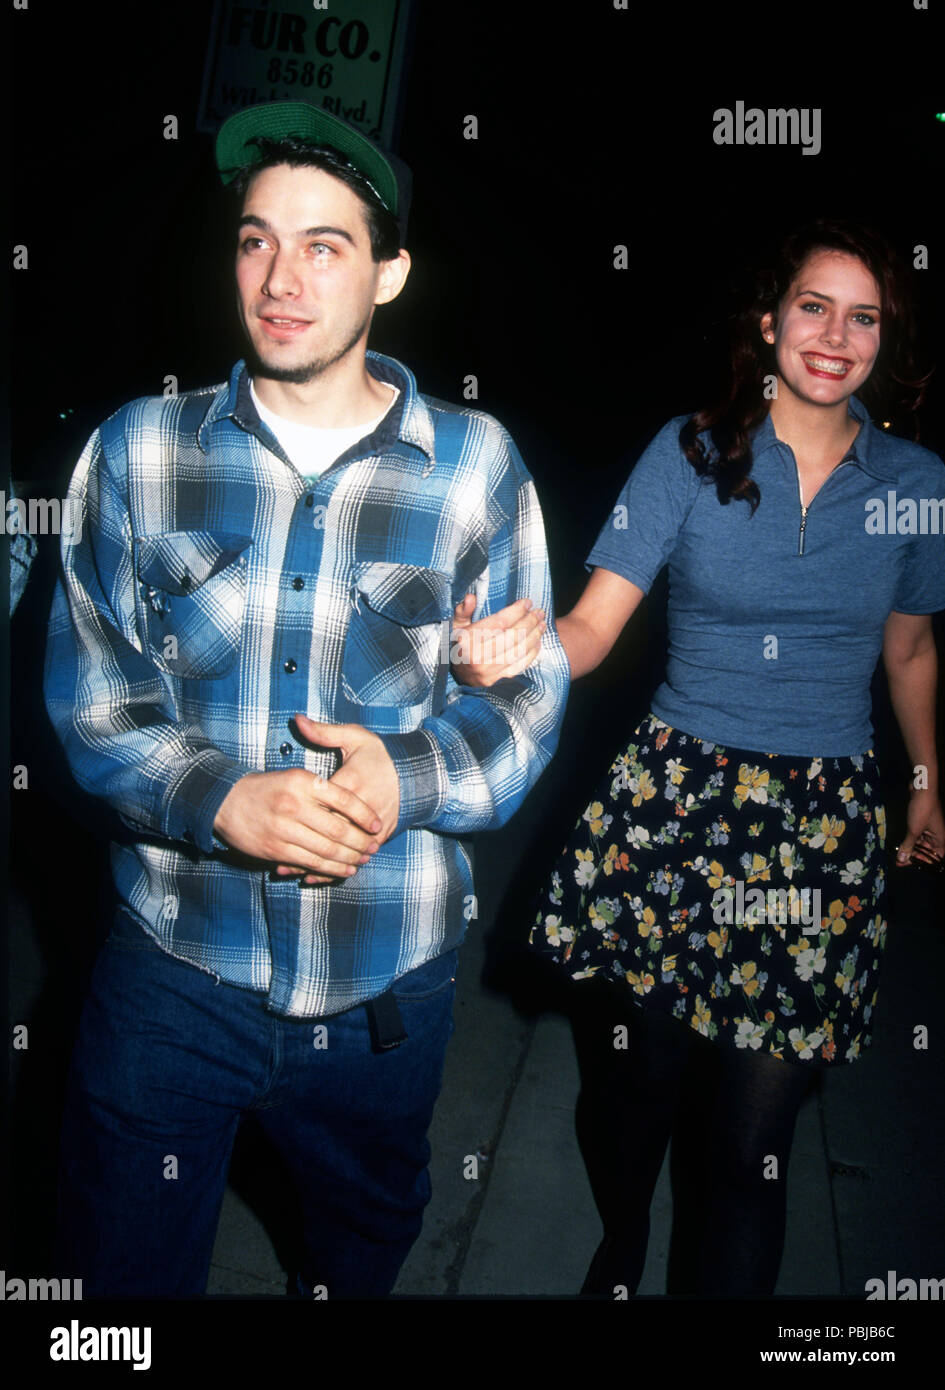 LOS ANGELES, CA - APRIL 2: (L-R) Rapper Adam Horovitz of the Beastie Boys, aka Ad-Rock and wife actress Ione Skye on April 2, 1992 in Los Angeles, California. Photo by Barry King/Alamy Stock Photo Stock Photo